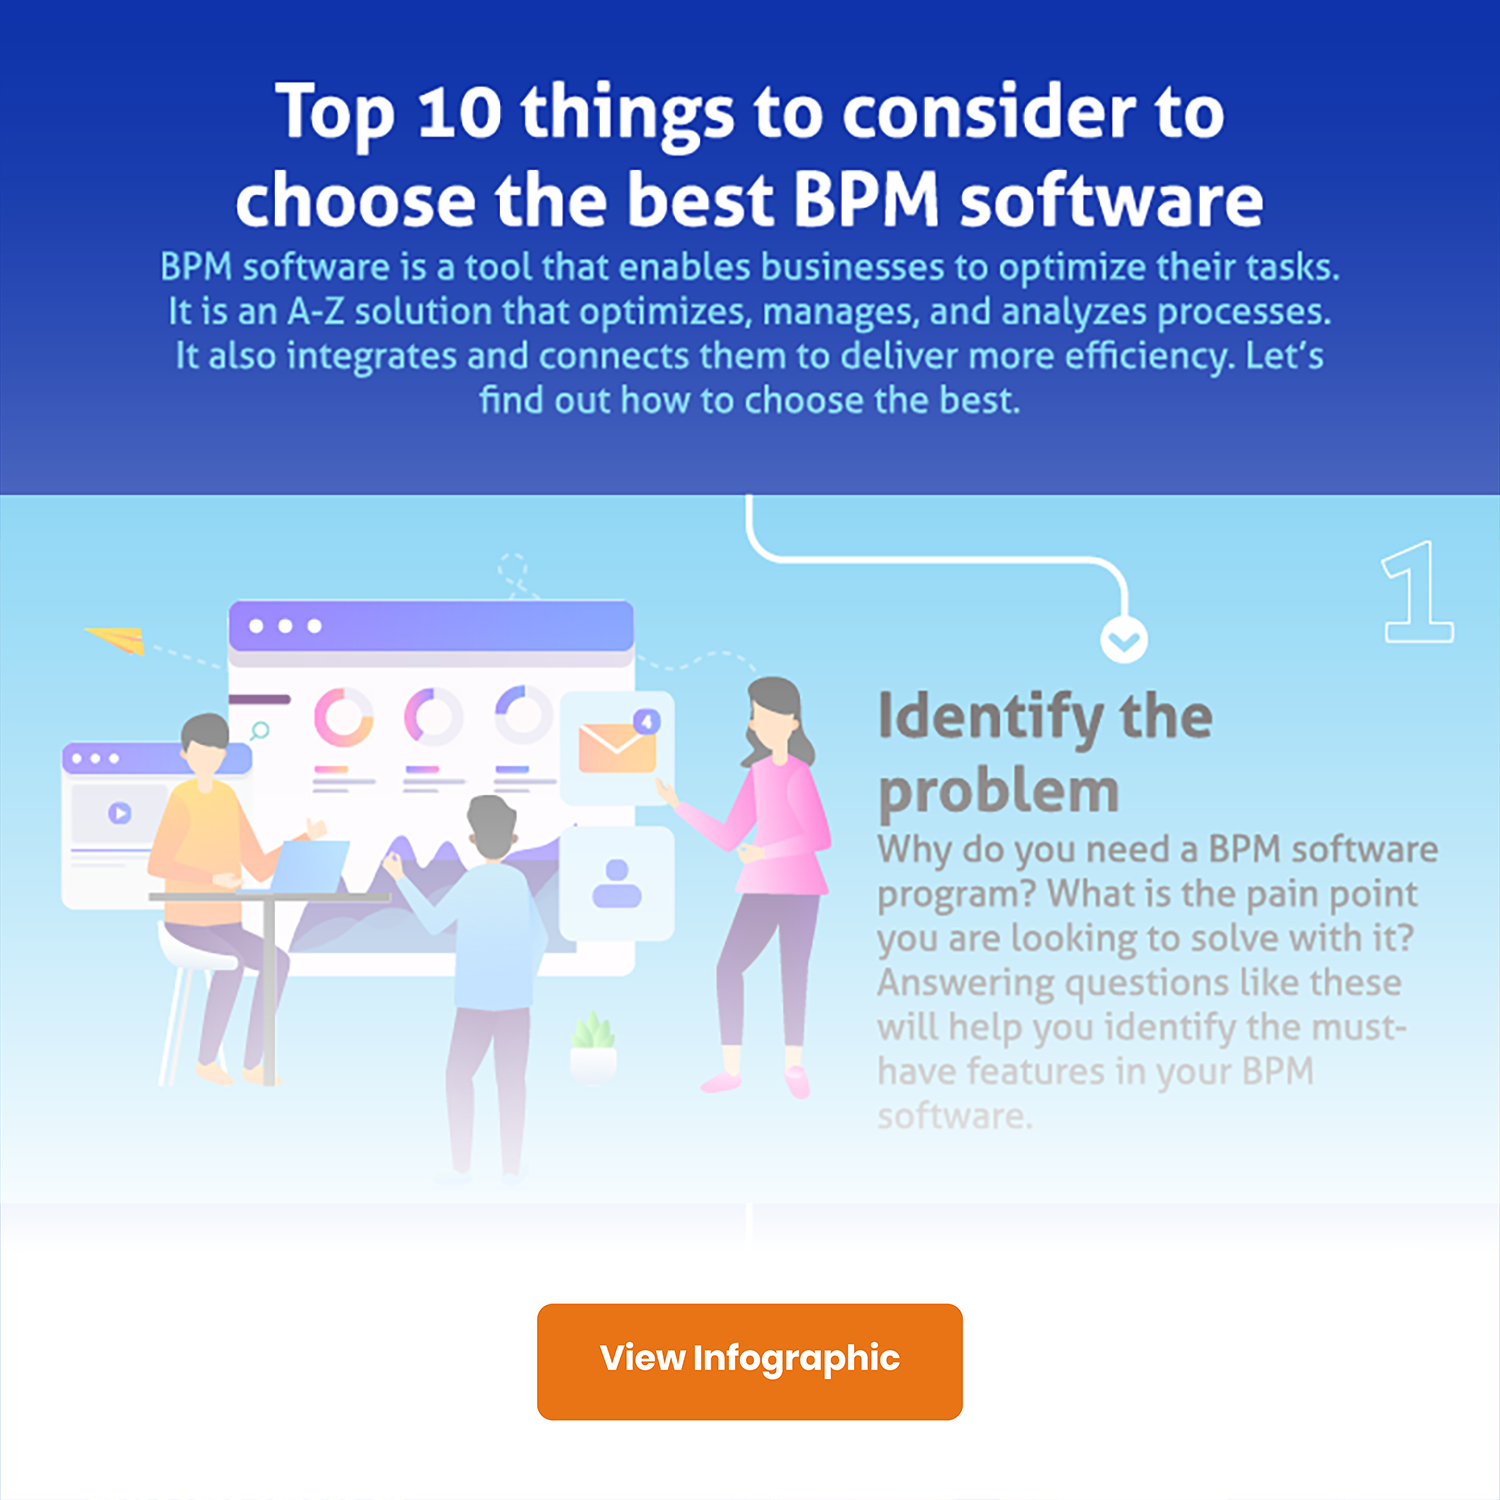 Top 10 things to consider to choose the best BPM software-Infographic